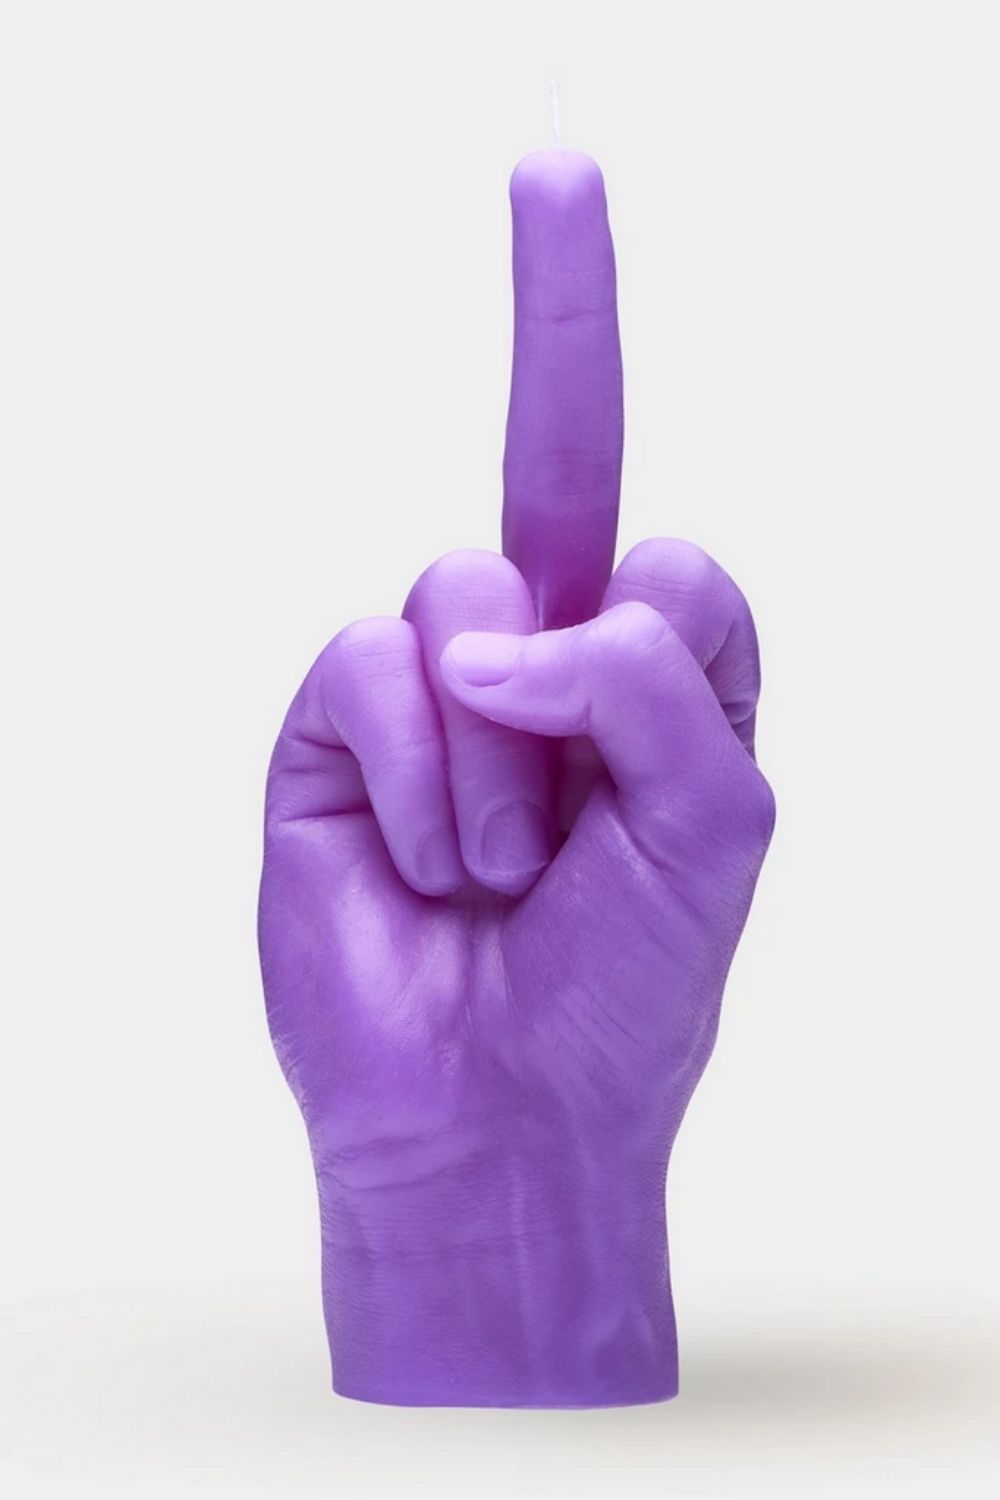 "F*CK YOU" HAND GESTURE CANDLE - PURPLE